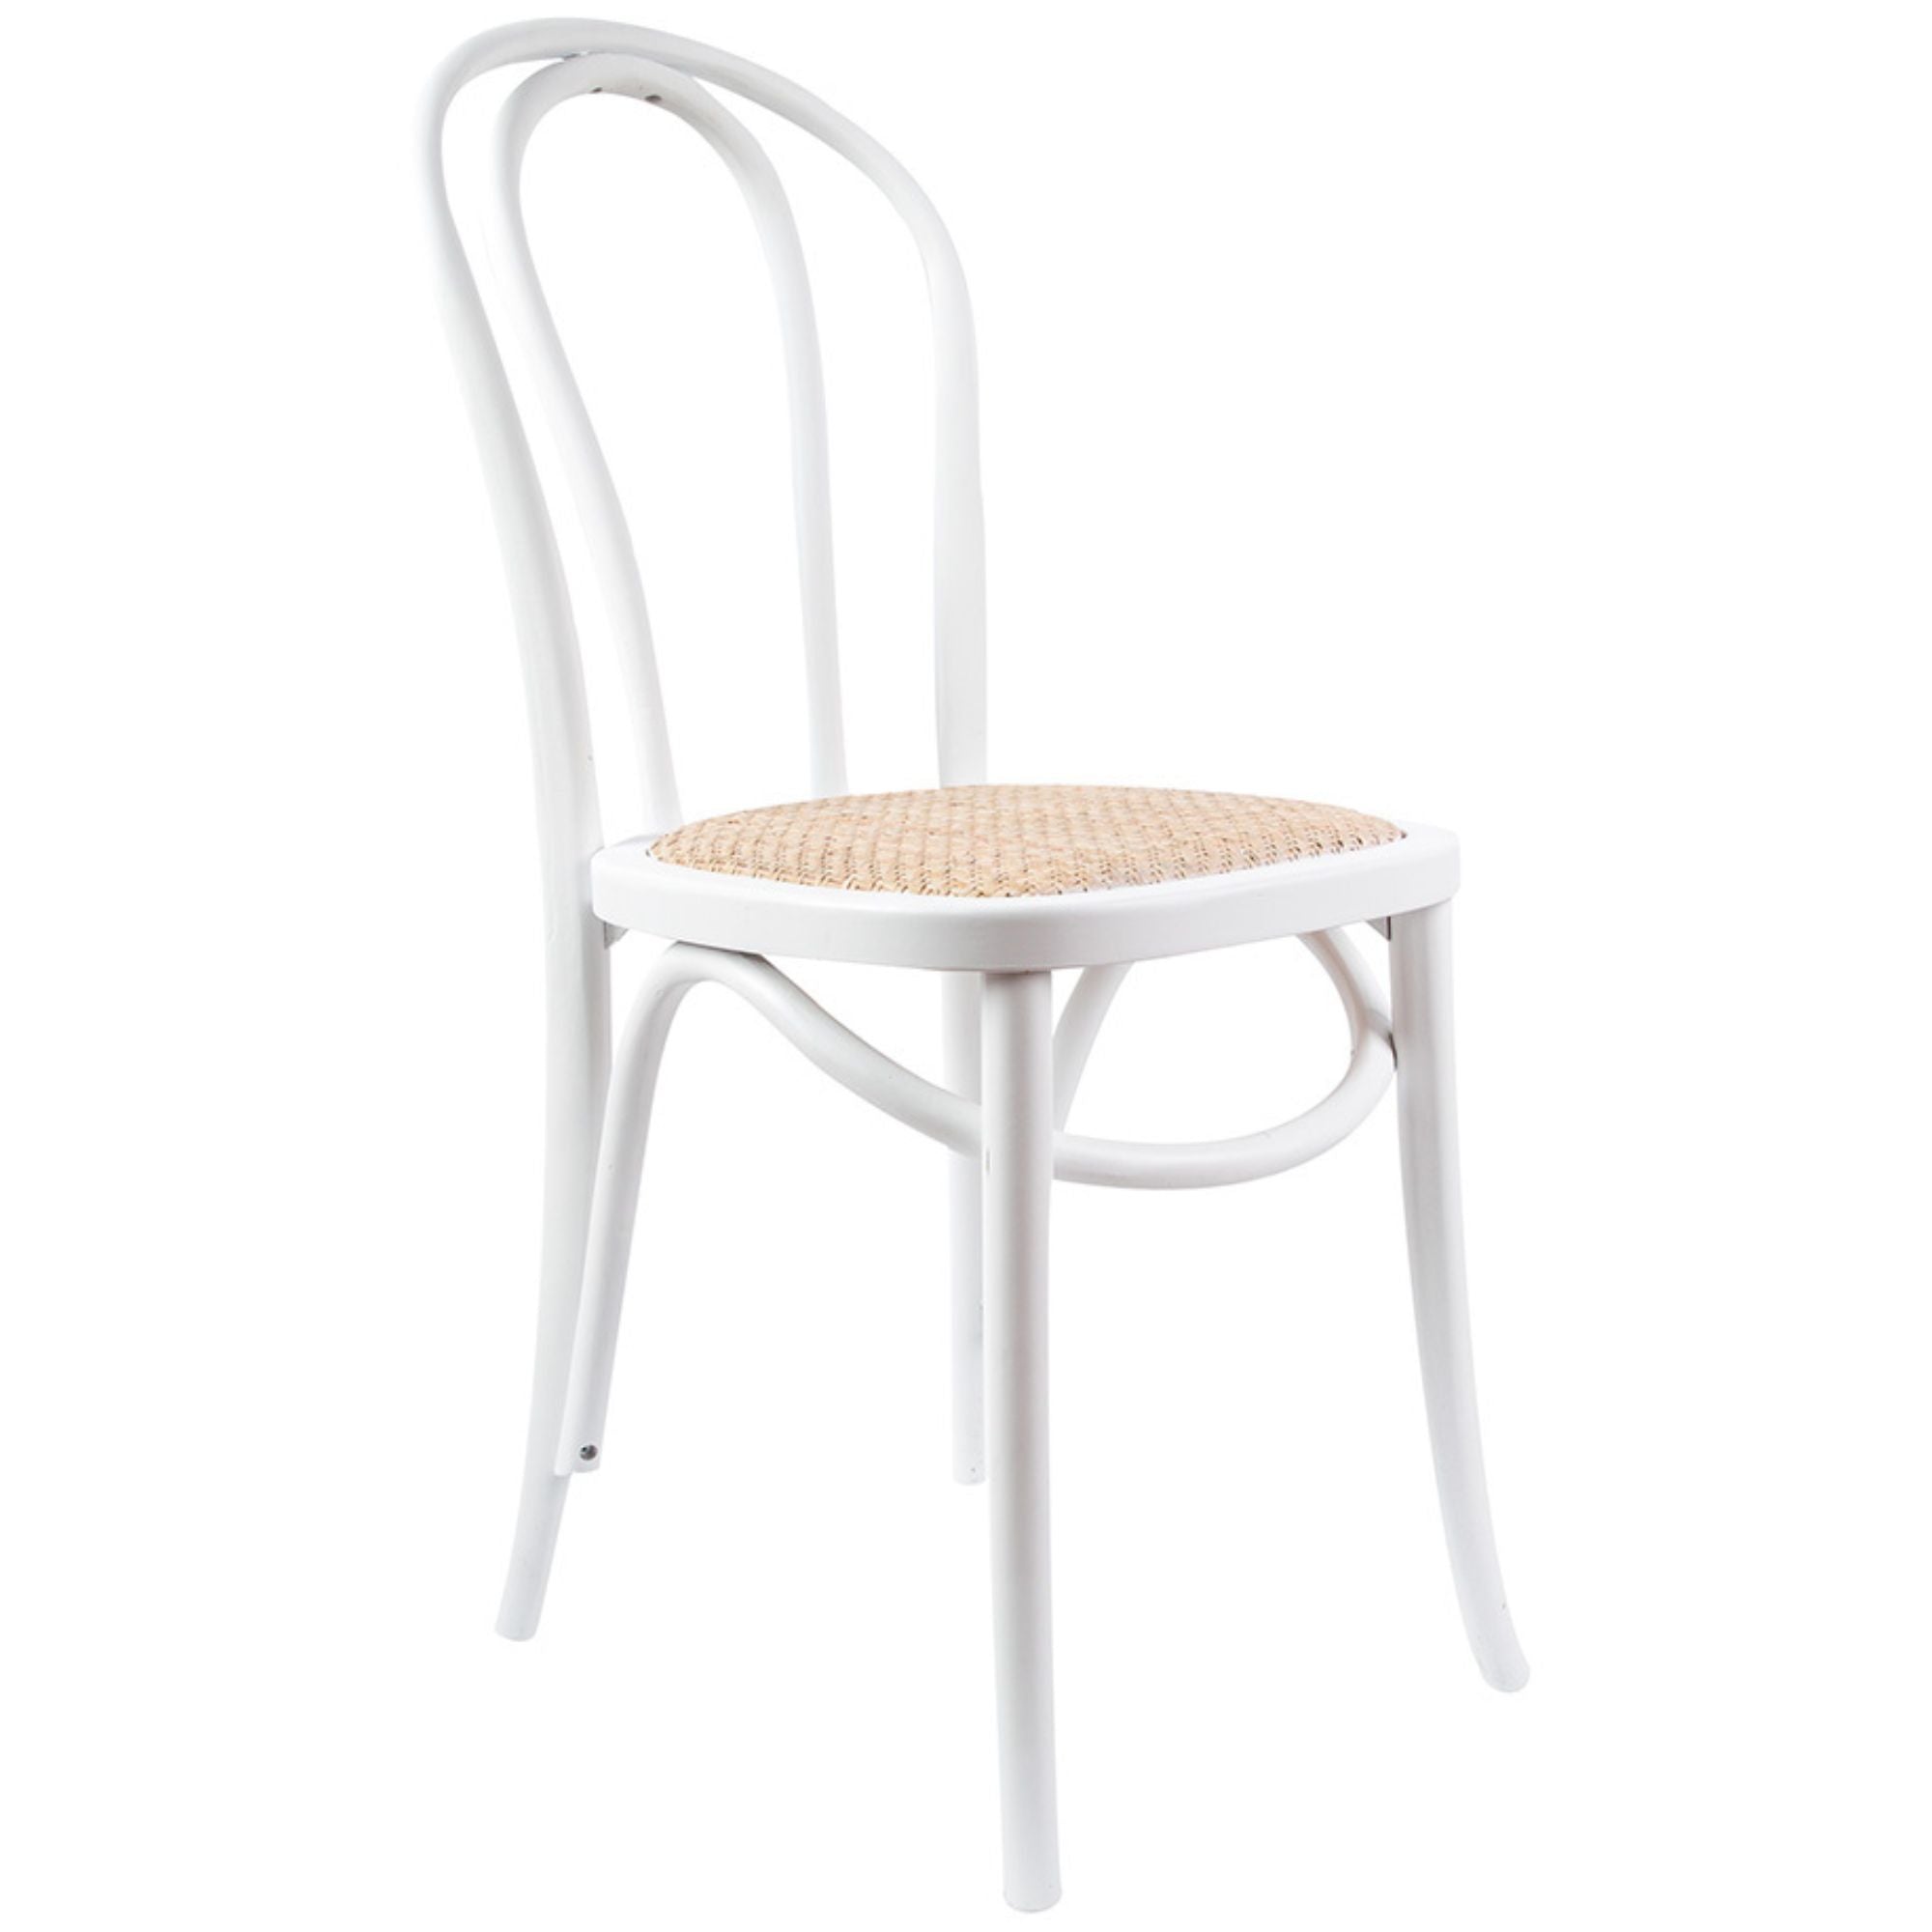 Azalea Arched Back Dining Chair 6 Set Solid Elm Timber Wood Rattan Seat - White Deals499